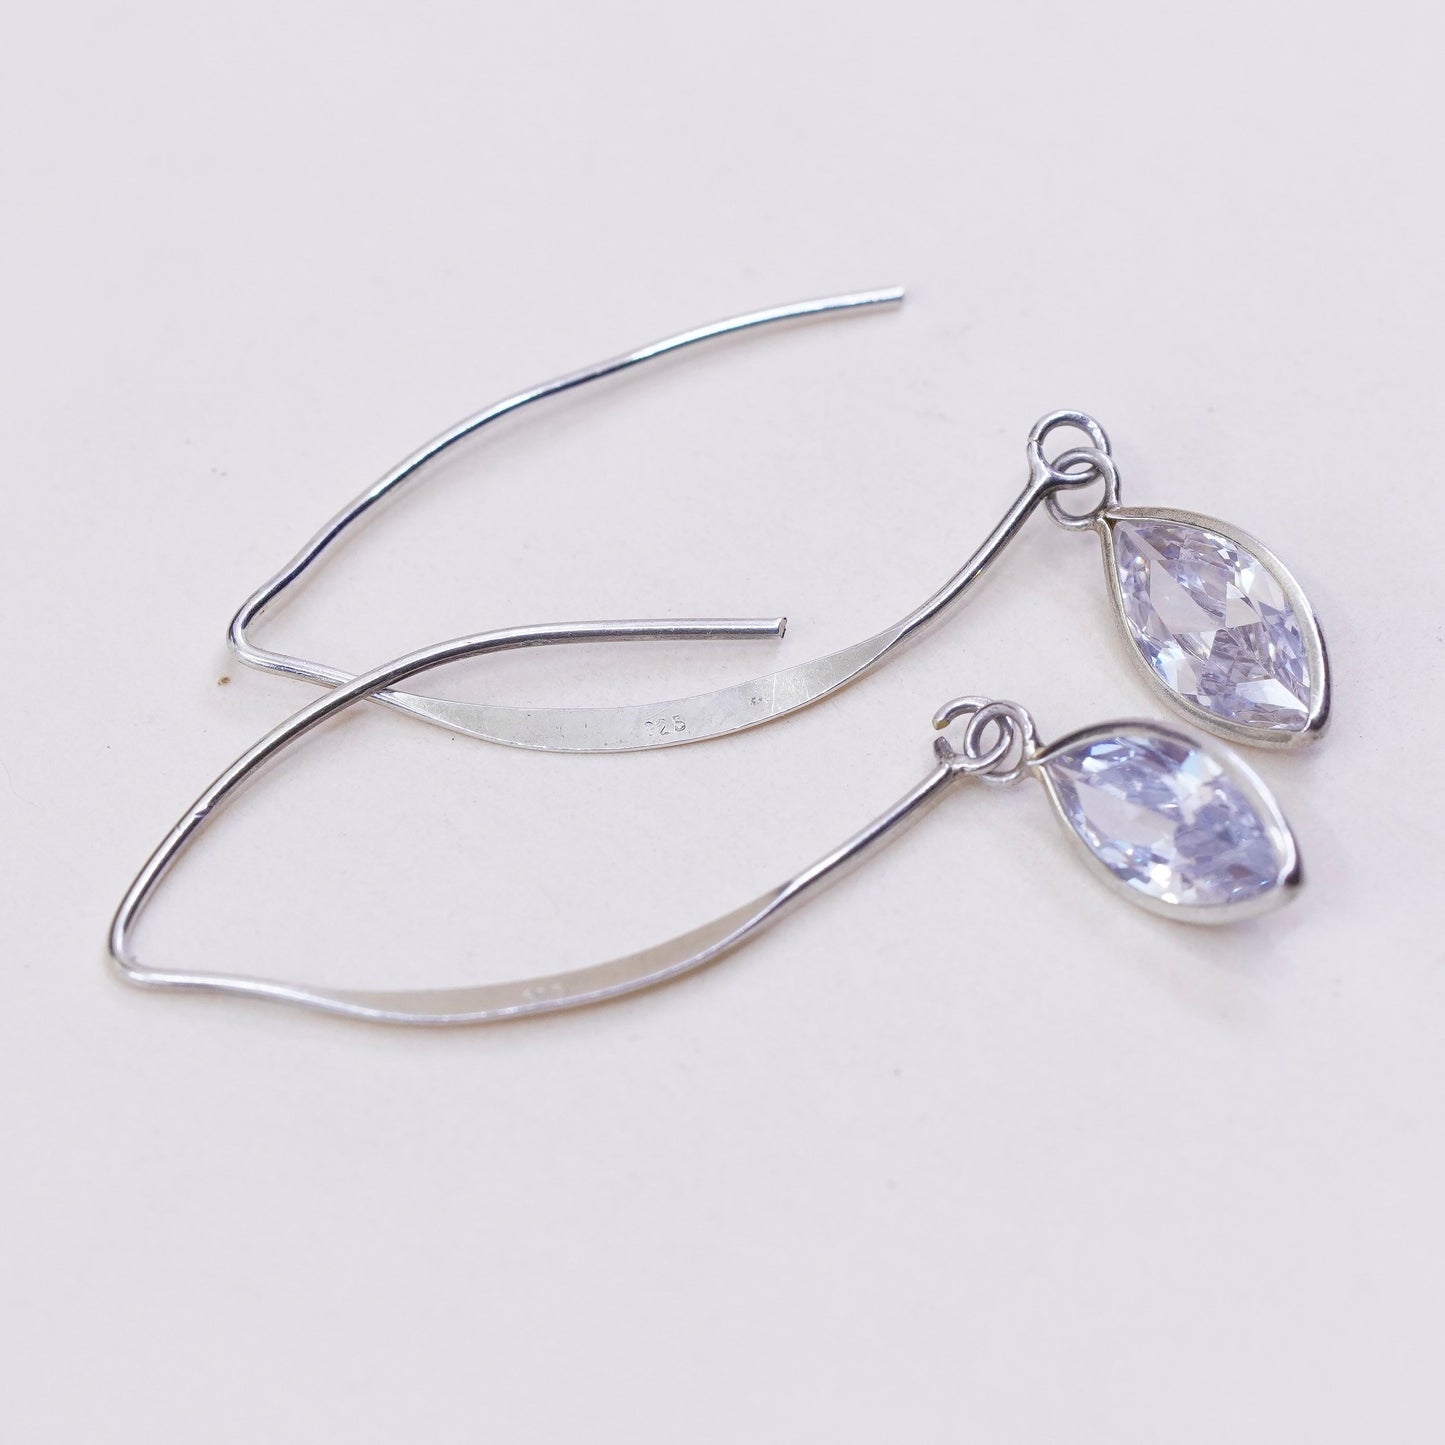 Vintage Sterling 925 silver handmade earrings with Marquise crystal